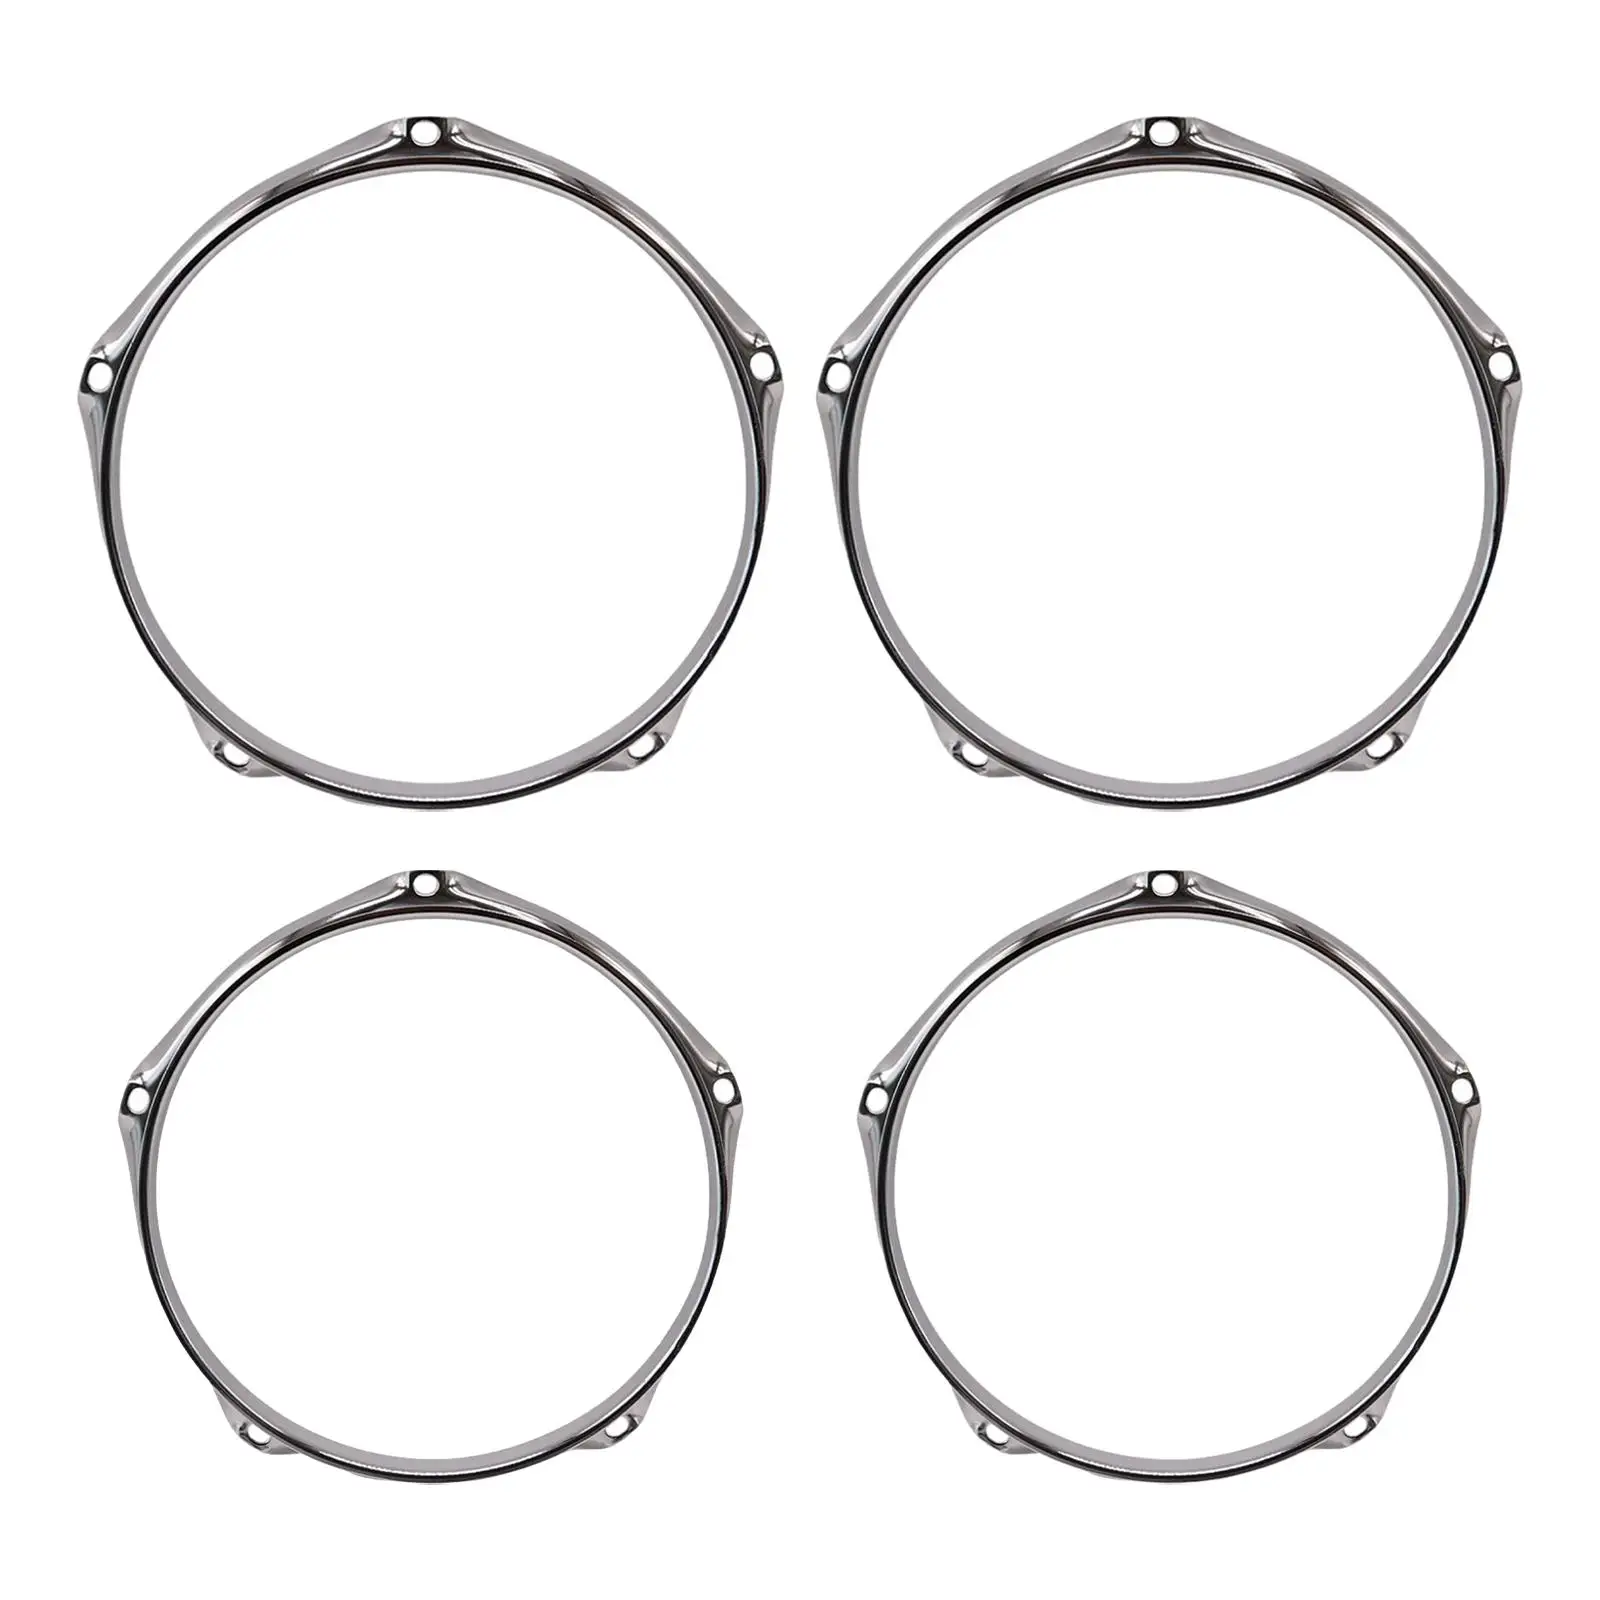 5 Holes Tom Drum Hoop Percussion Instrument Snare Drum Batter for Office